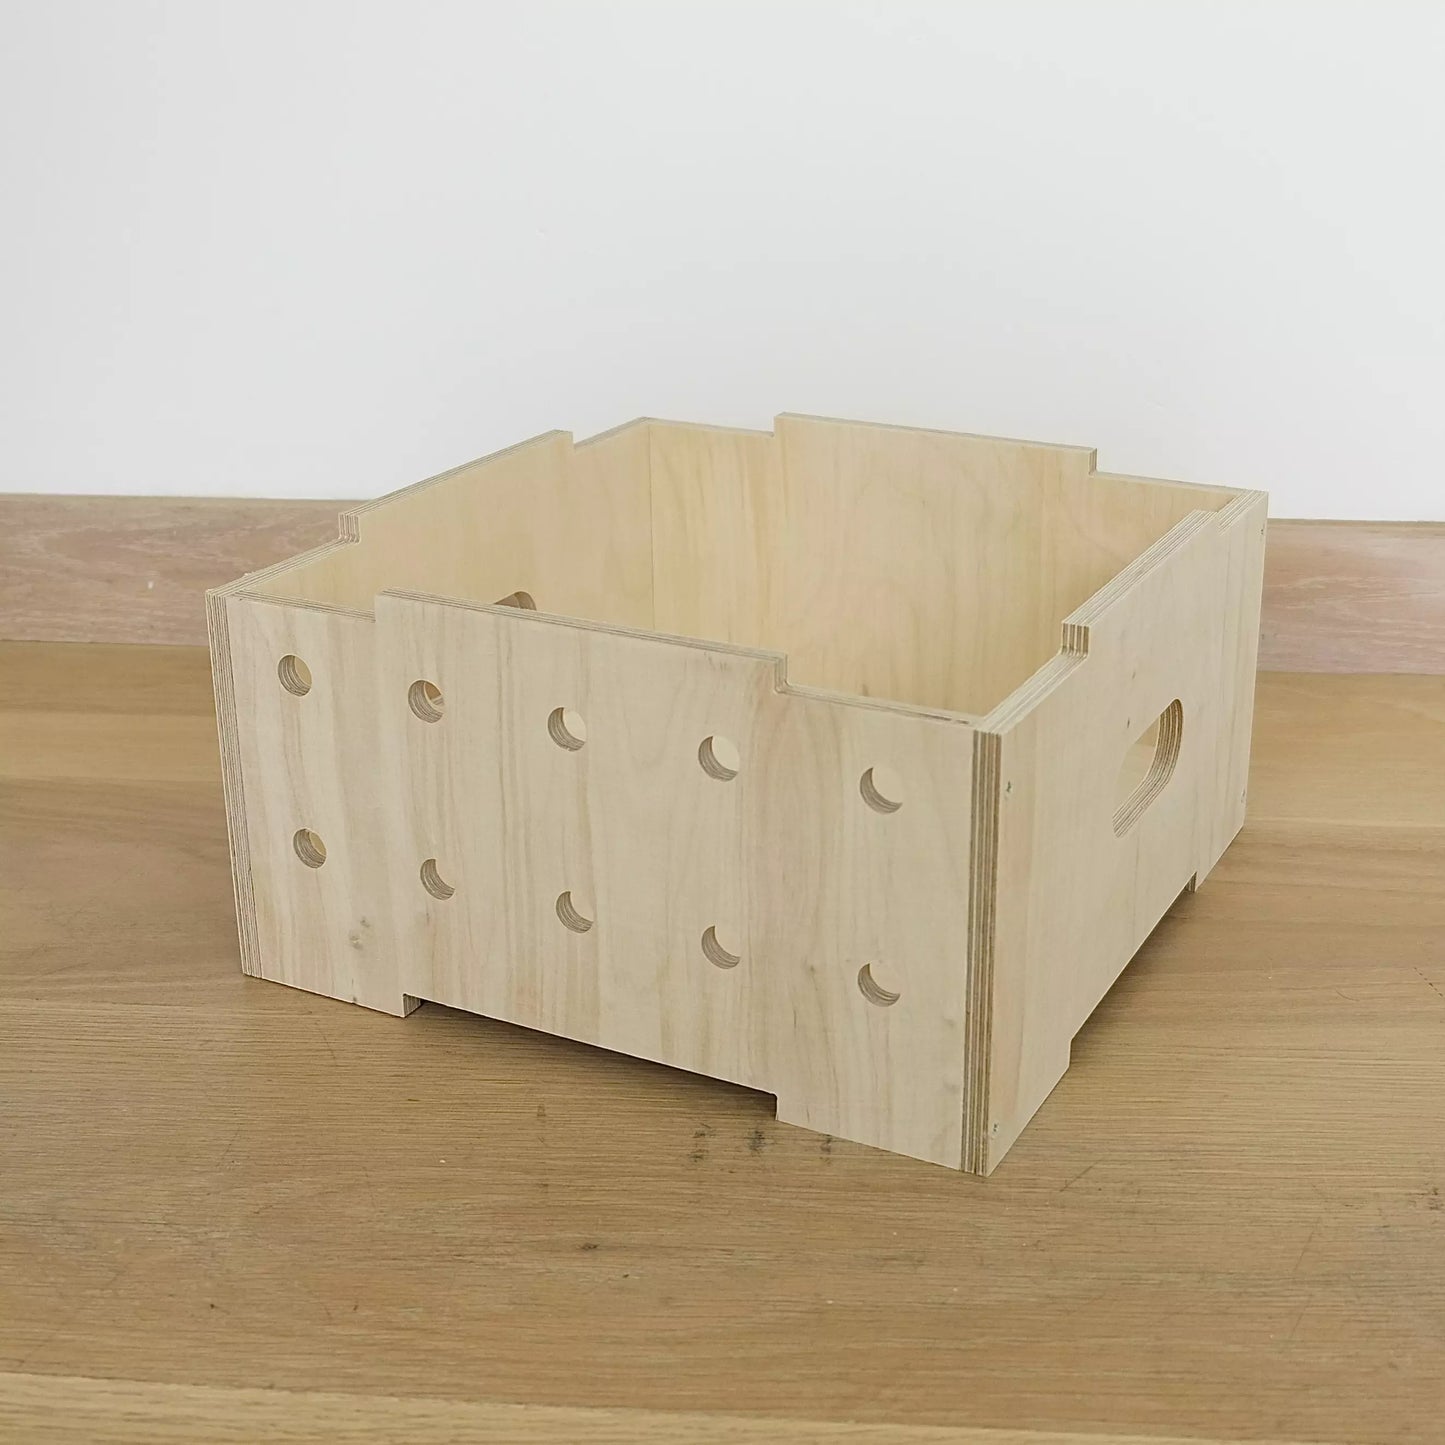 A simple pale wooden crate with two rows of holes in front. It faces diagonally to left and sits on wooden floor.